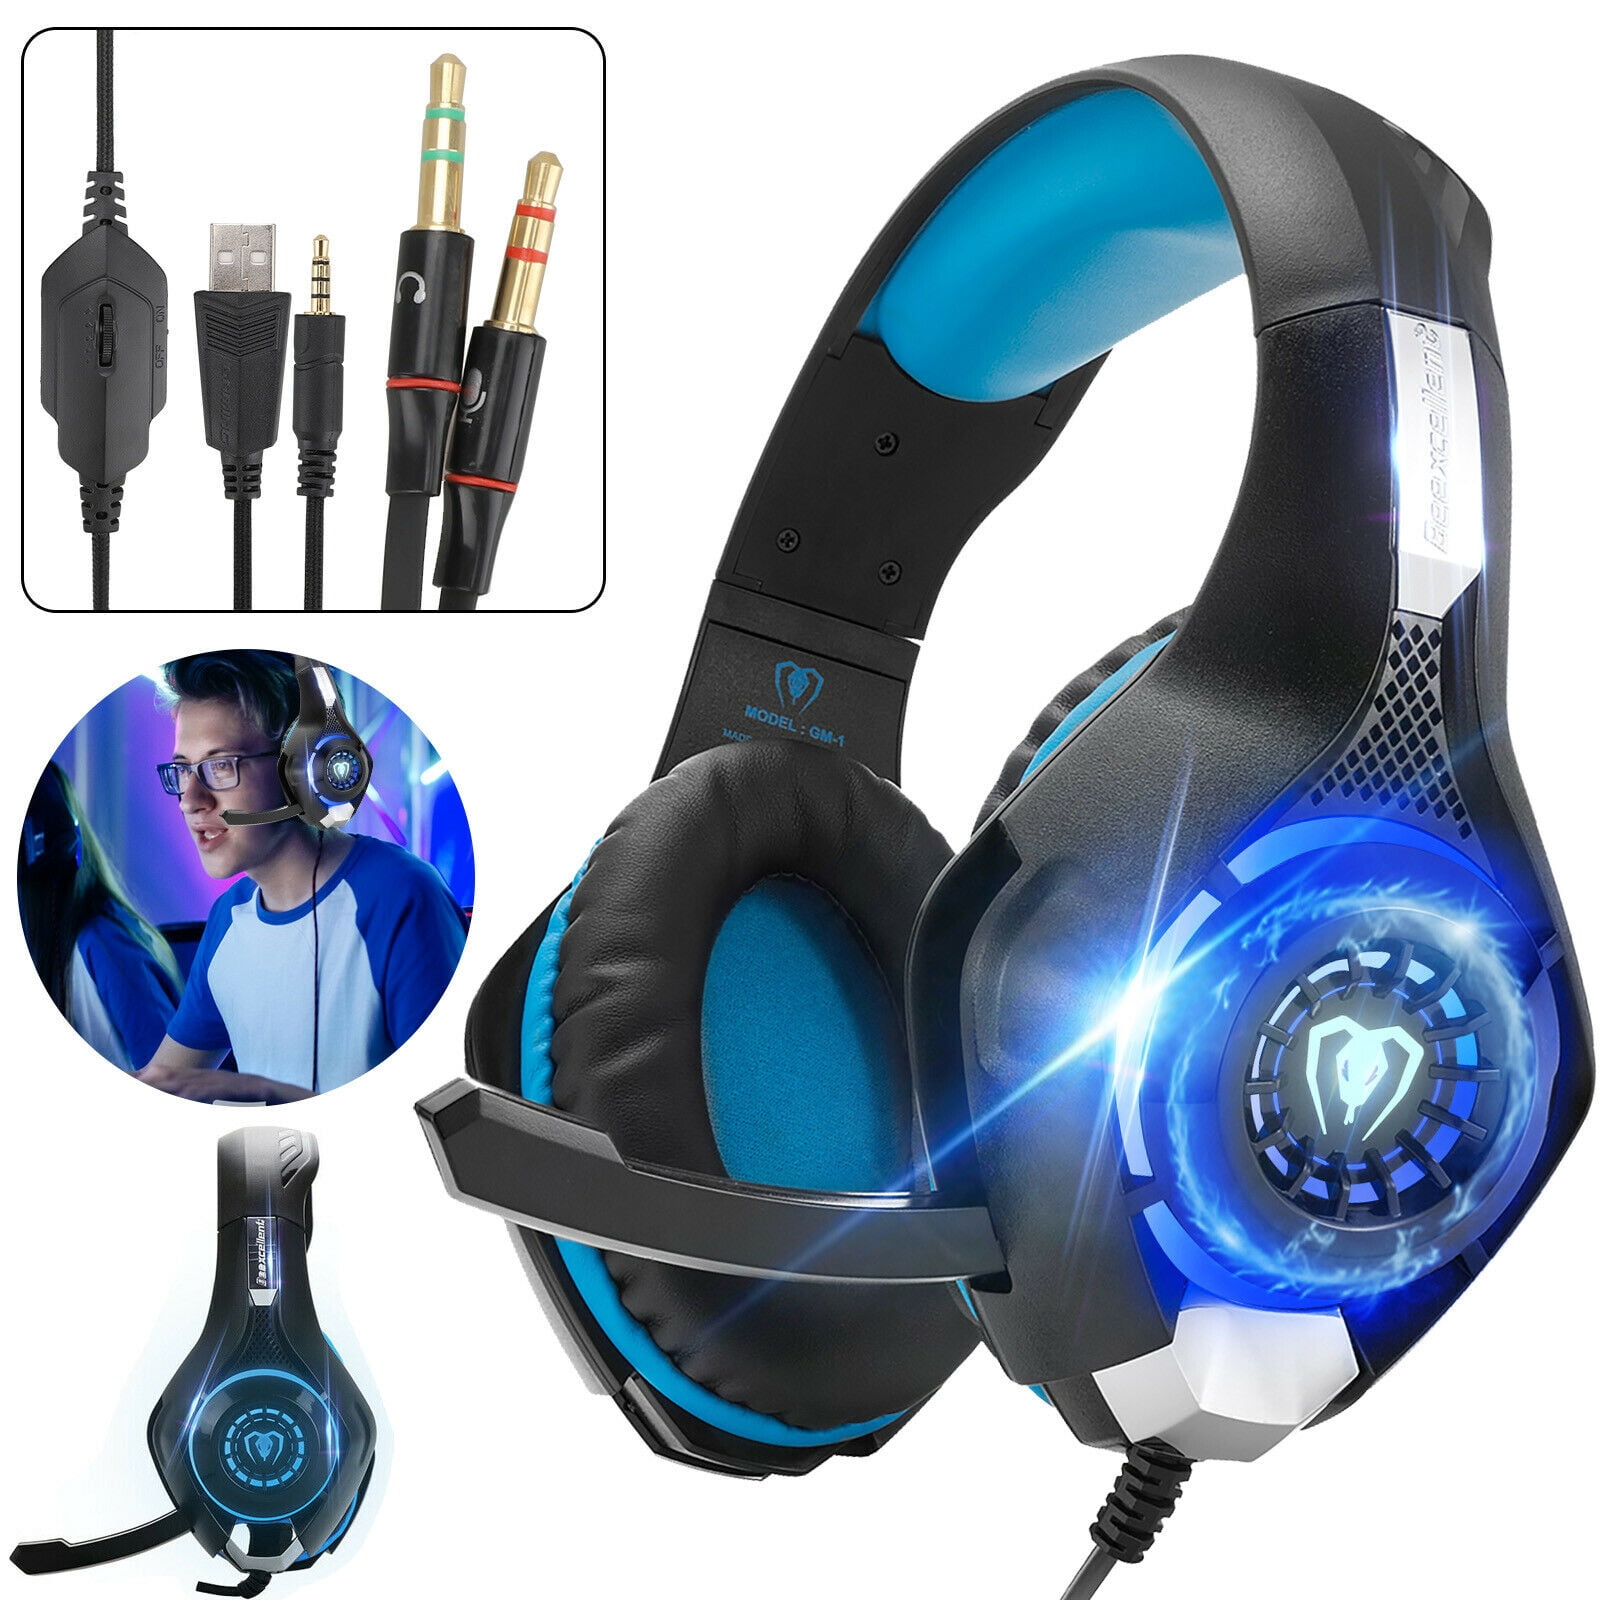 4 In 1 Gaming Headset Headphone With Mic For Ps4 44 Ps3 44 Xbox 360 Pc Walmart Com